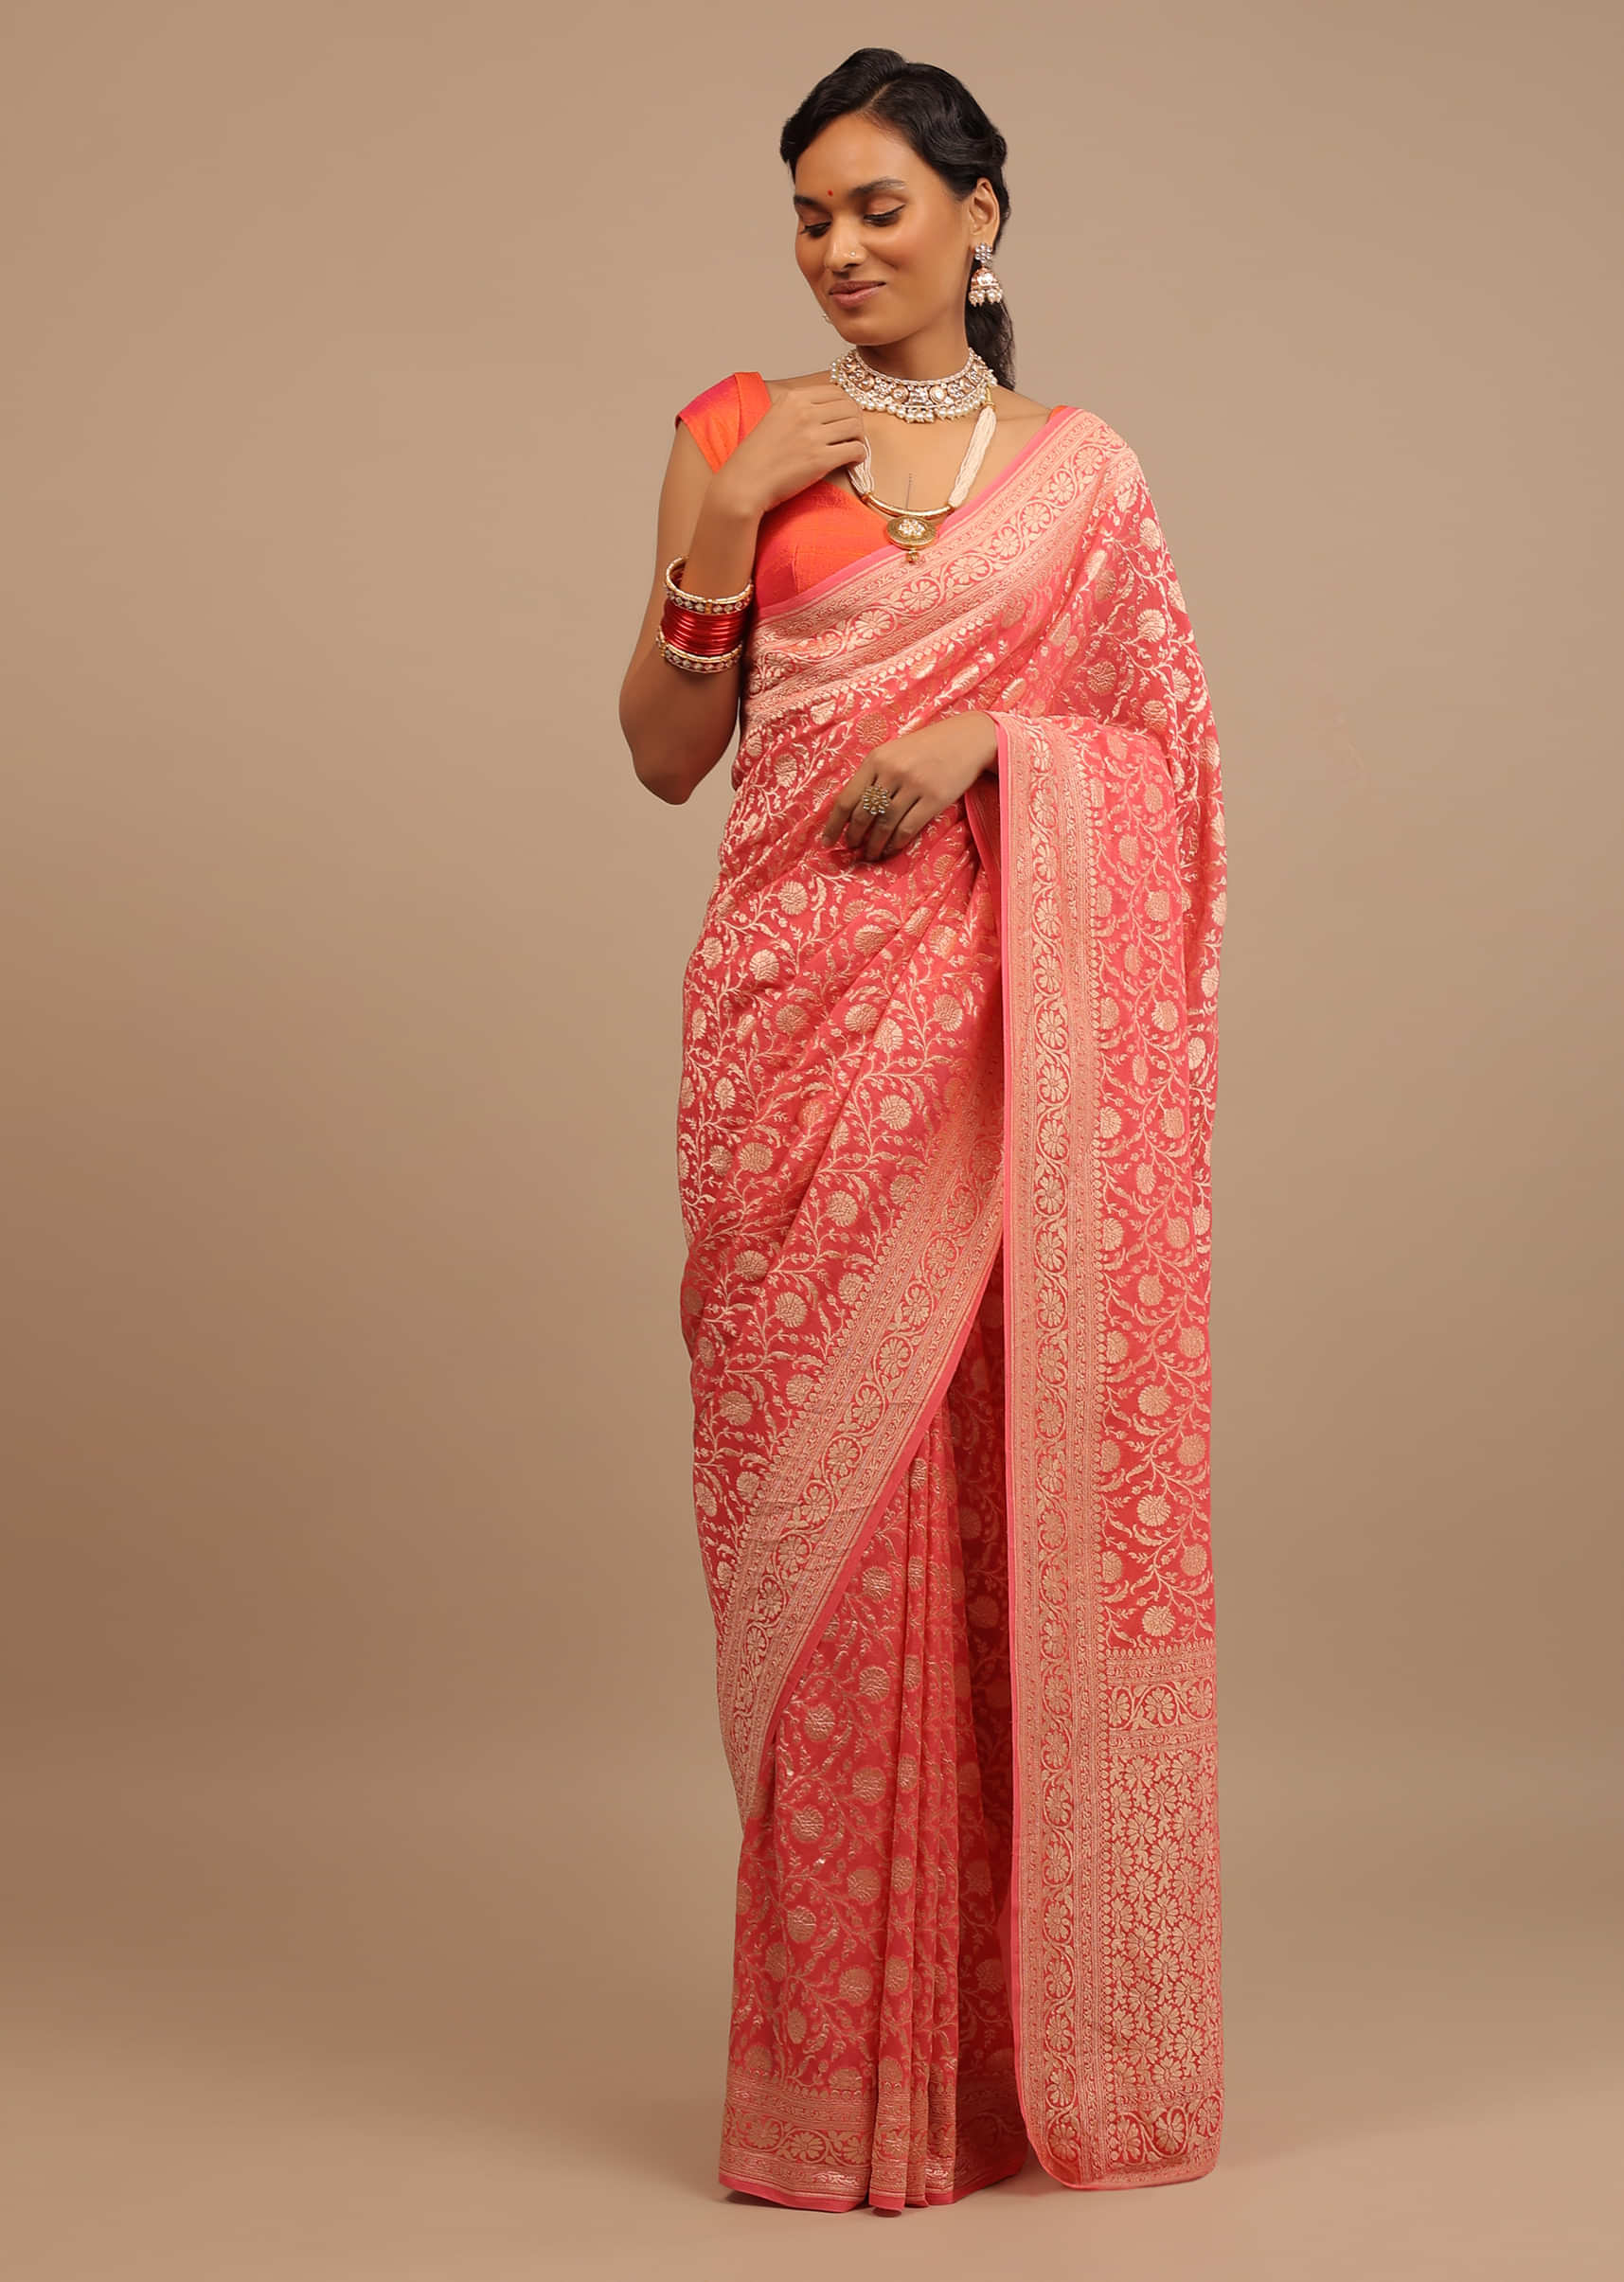 Coral Pink Saree In A Traditional Silhouette Made In Georgette With Floral Jaal Work